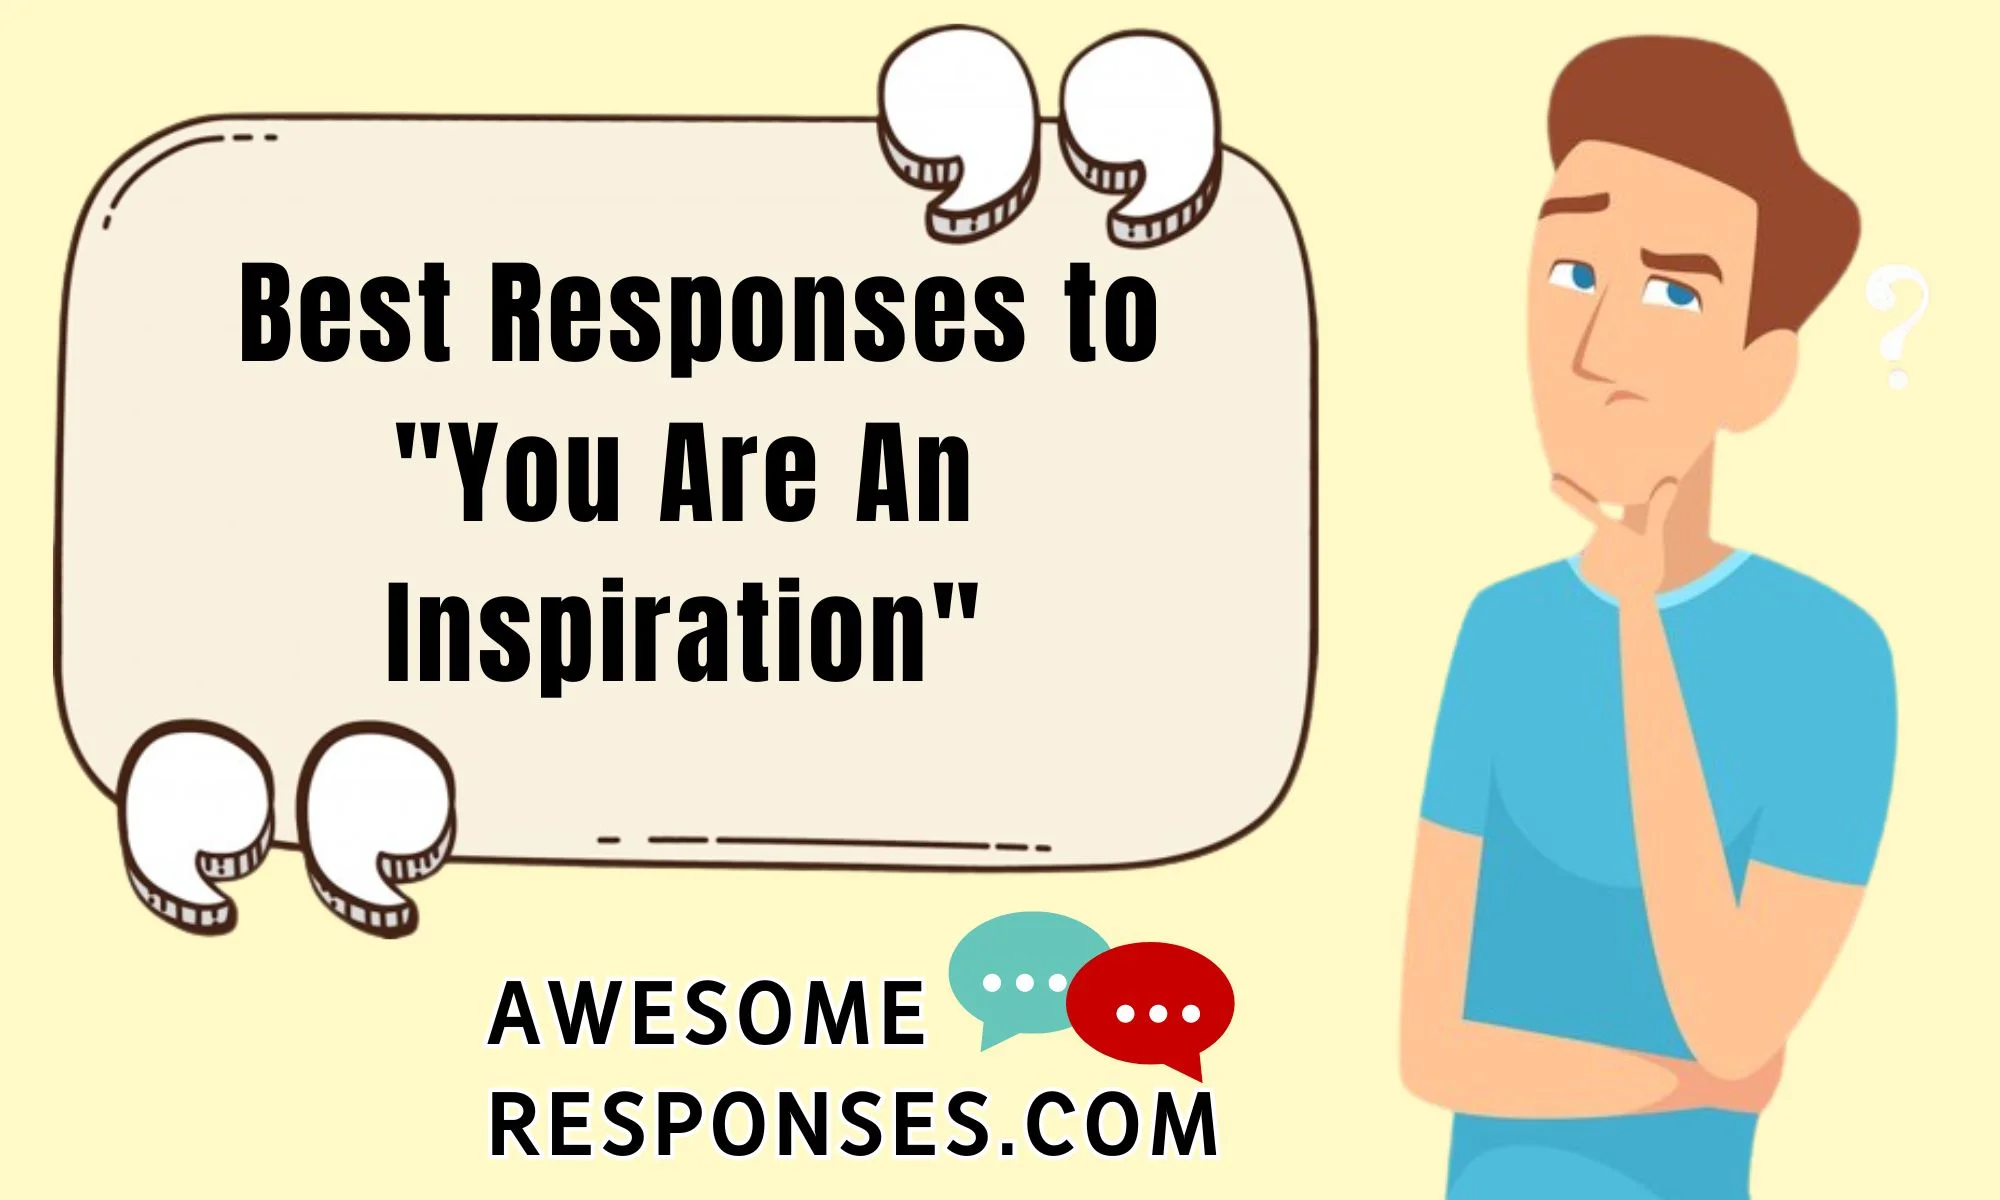 Best Responses to "You Are An Inspiration"